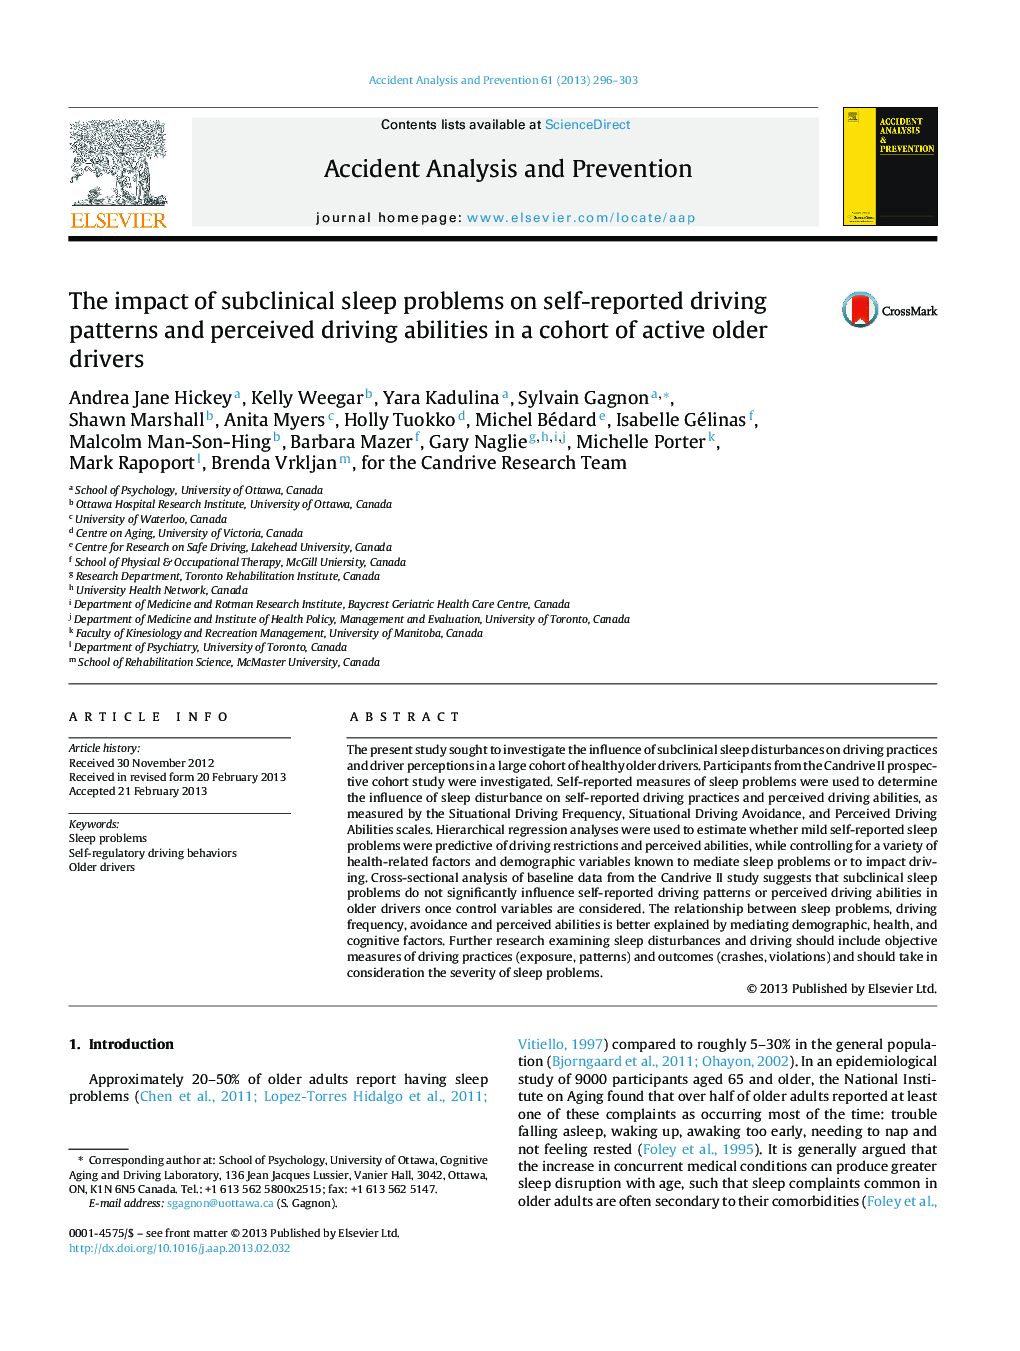 The impact of subclinical sleep problems on self-reported driving patterns and perceived driving abilities in a cohort of active older drivers